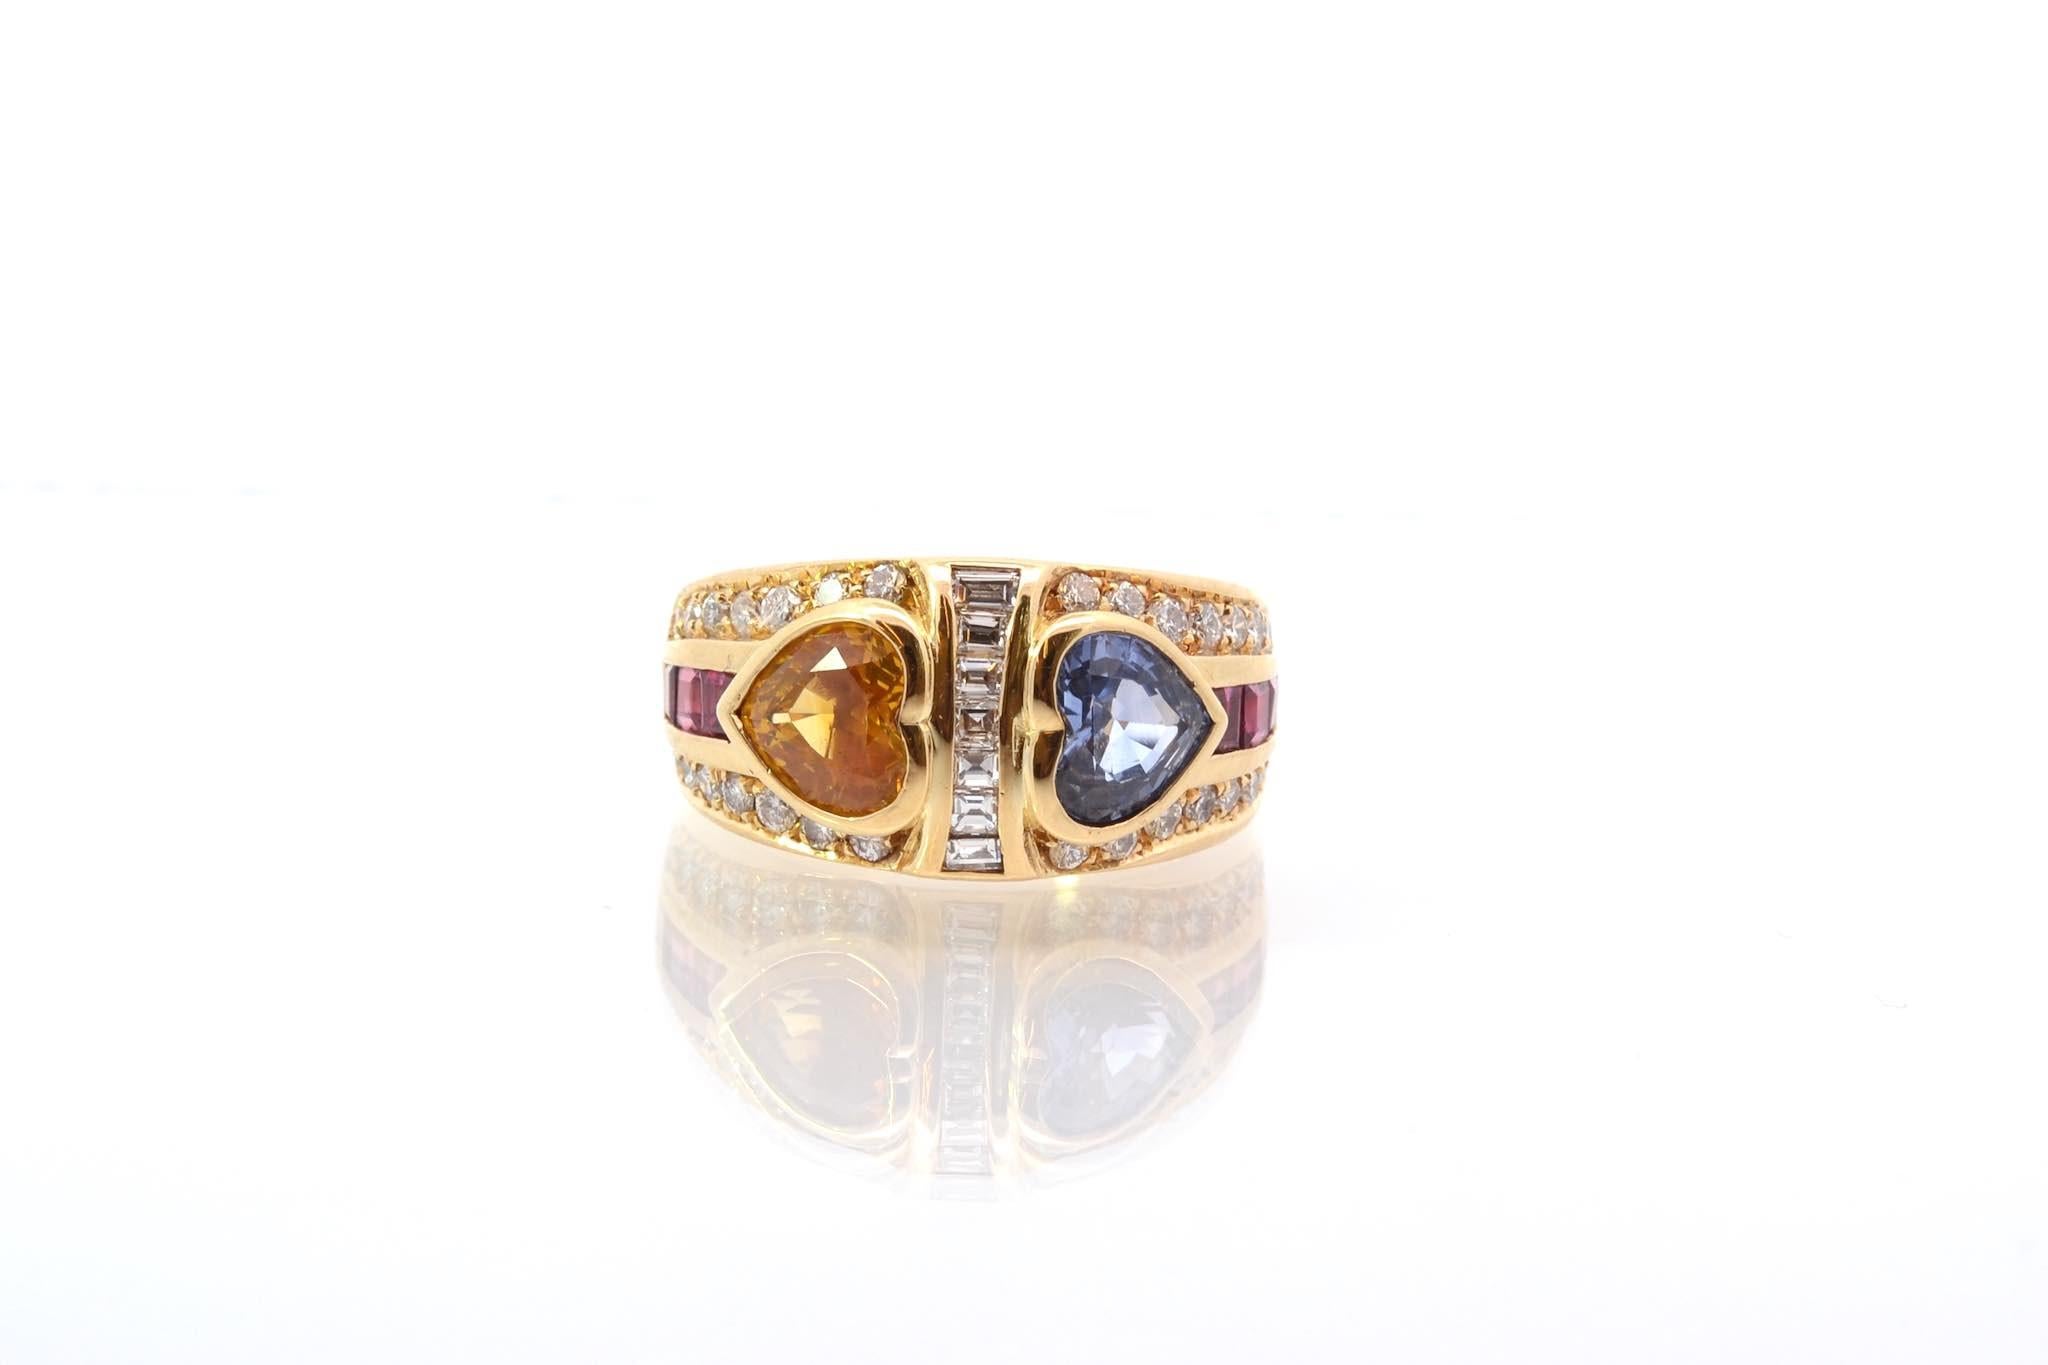 Stones: 2 Sapphires: 4 cts, diamonds: 1.20 cts and rubies: 0.30 ct
Material: 18k yellow gold
Weight: 14.3g
Period: 1980
Size: 52.5 (free sizing)
Certificate
Ref. : 25629